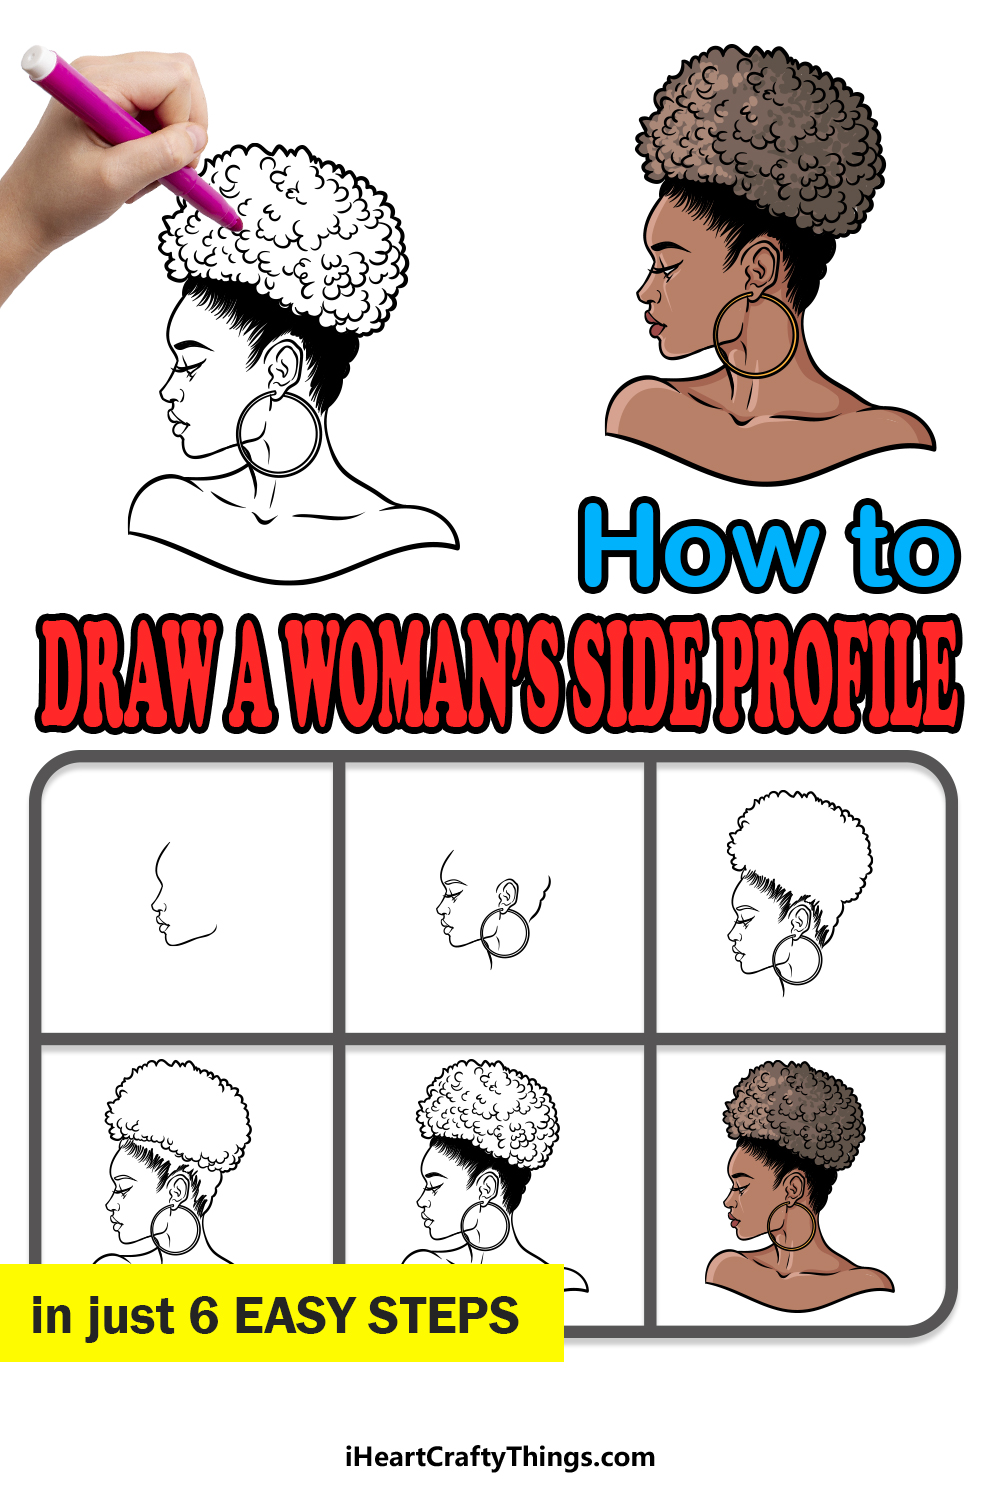 how to draw a Woman’s Side Profile in 6 easy steps